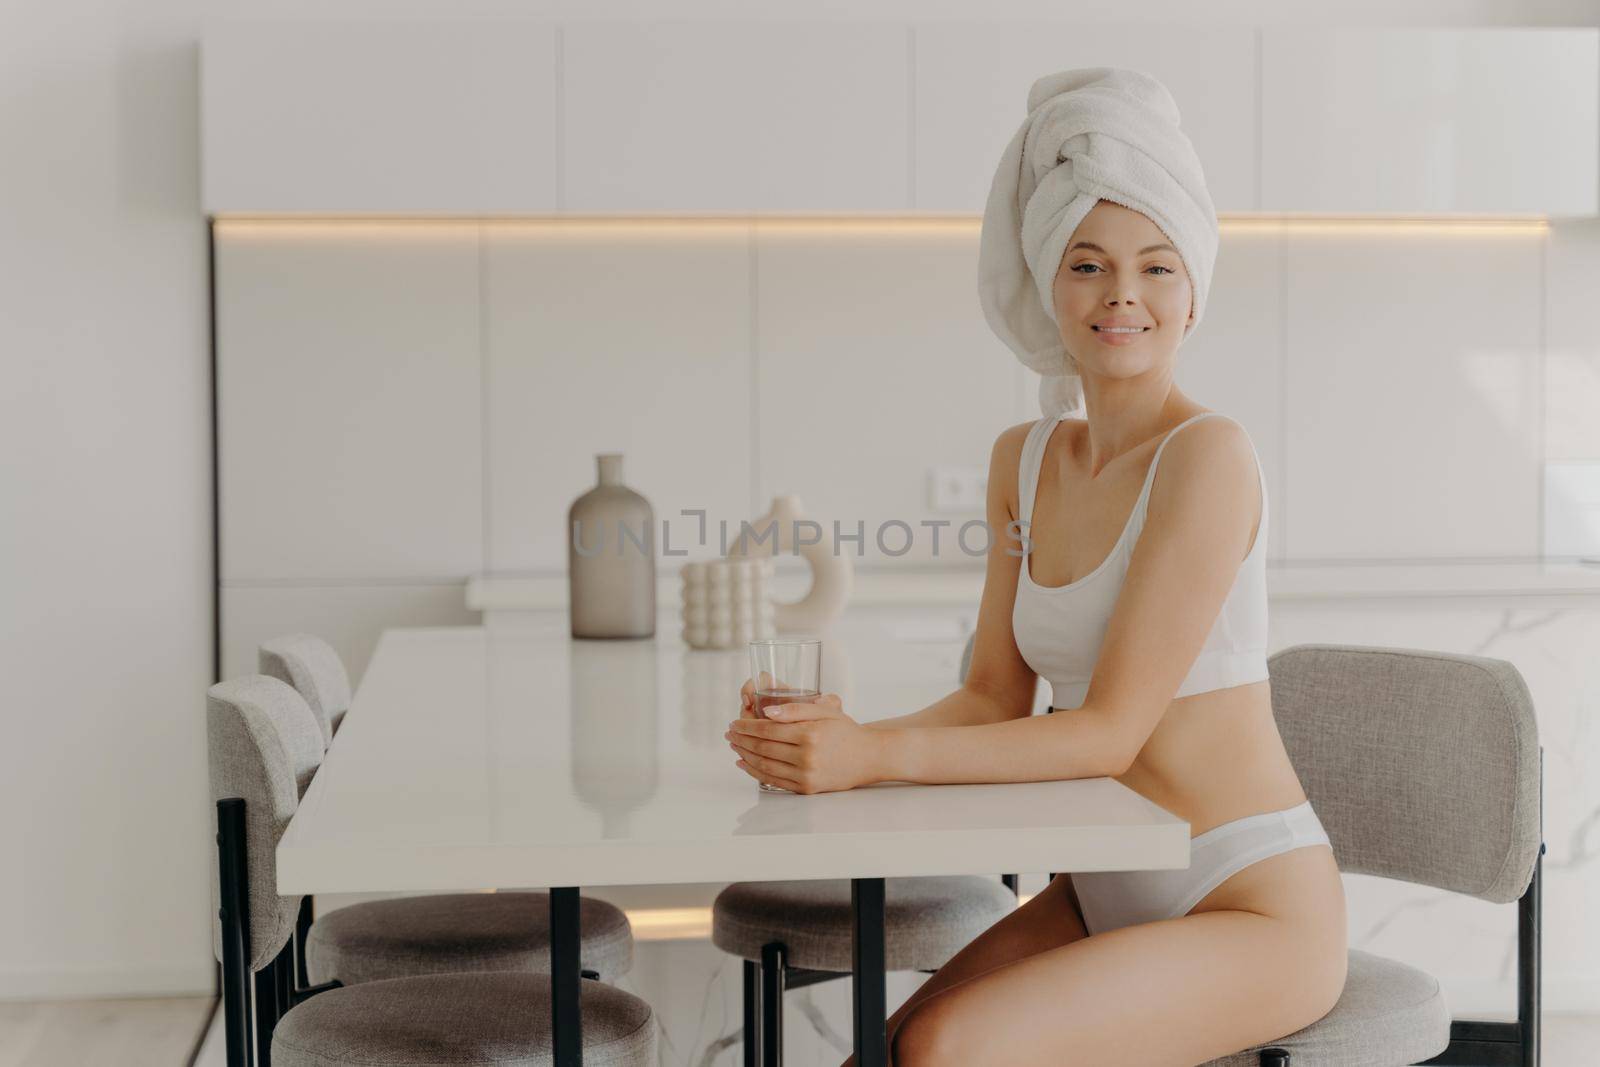 First thing in the morning. Relaxed slender woman sitting in stylish kitchen after taking shower with glass of pure mineral water, wears white underwear and towel over wet hair. Weightloss and dieting